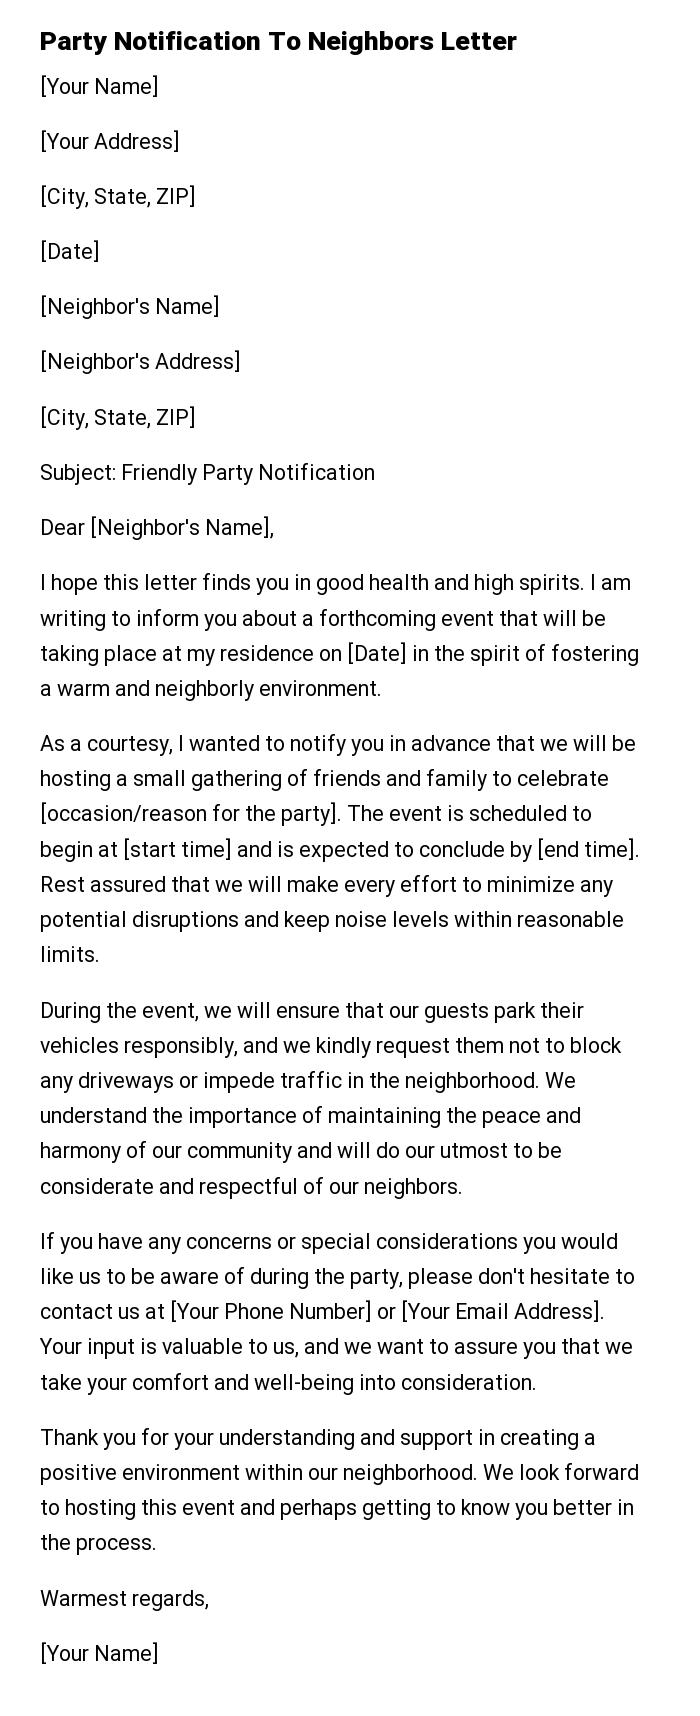 Party Notification To Neighbors Letter